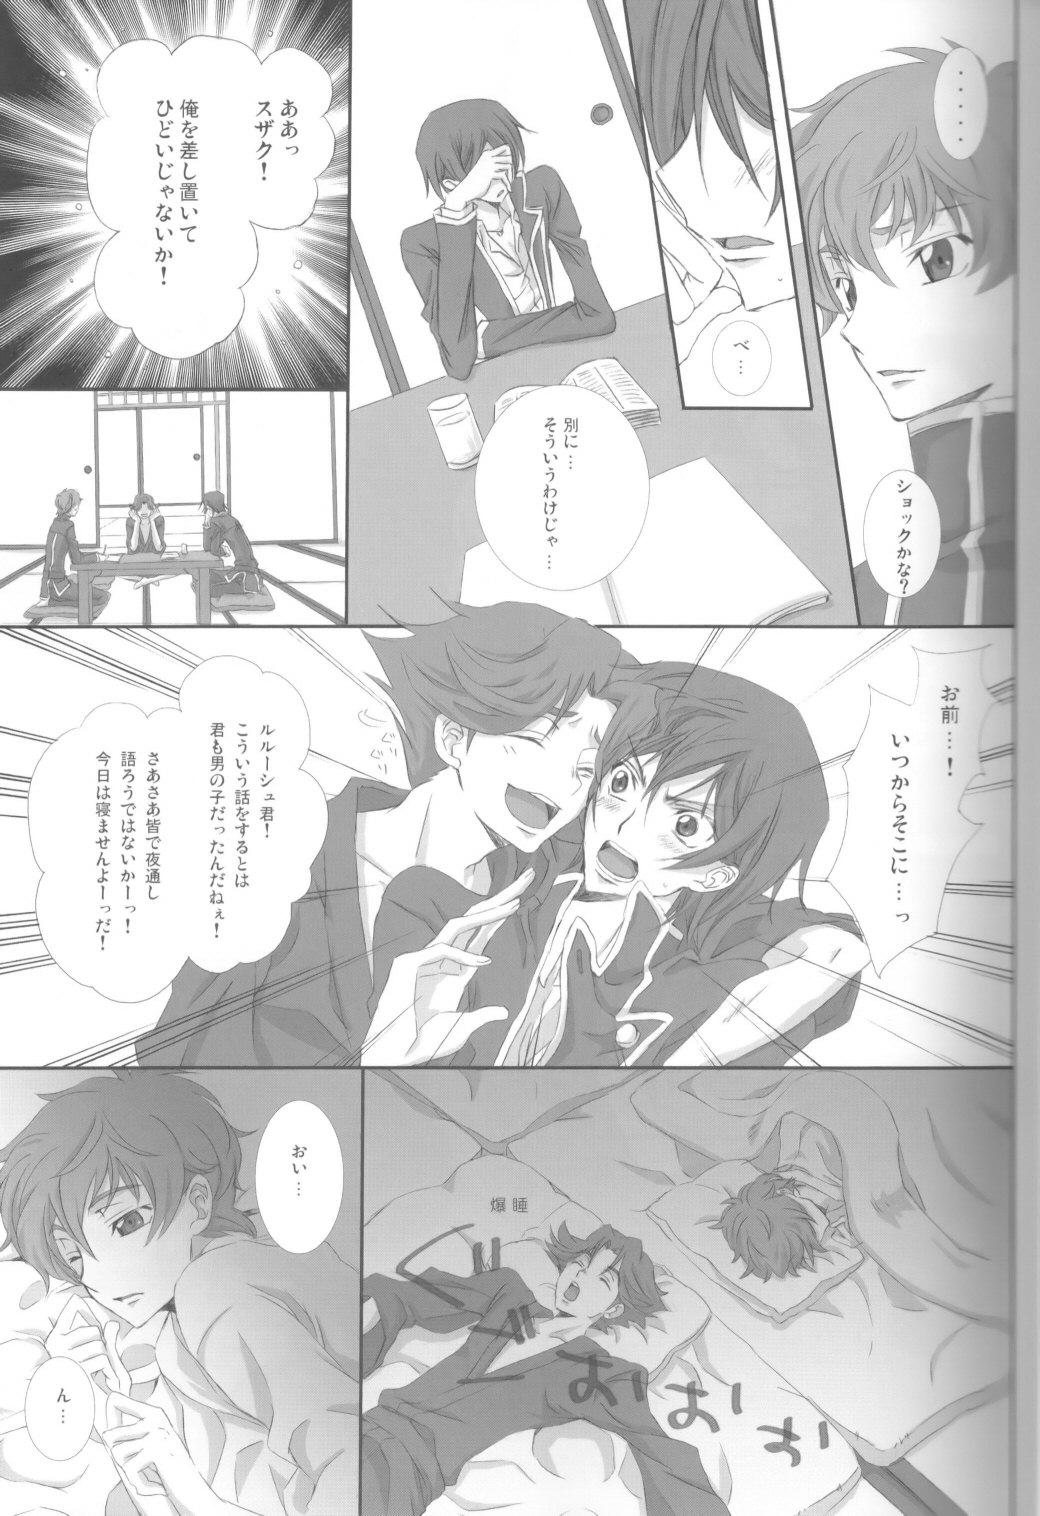 Stripping on・non・om - Code geass Casa - Page 10